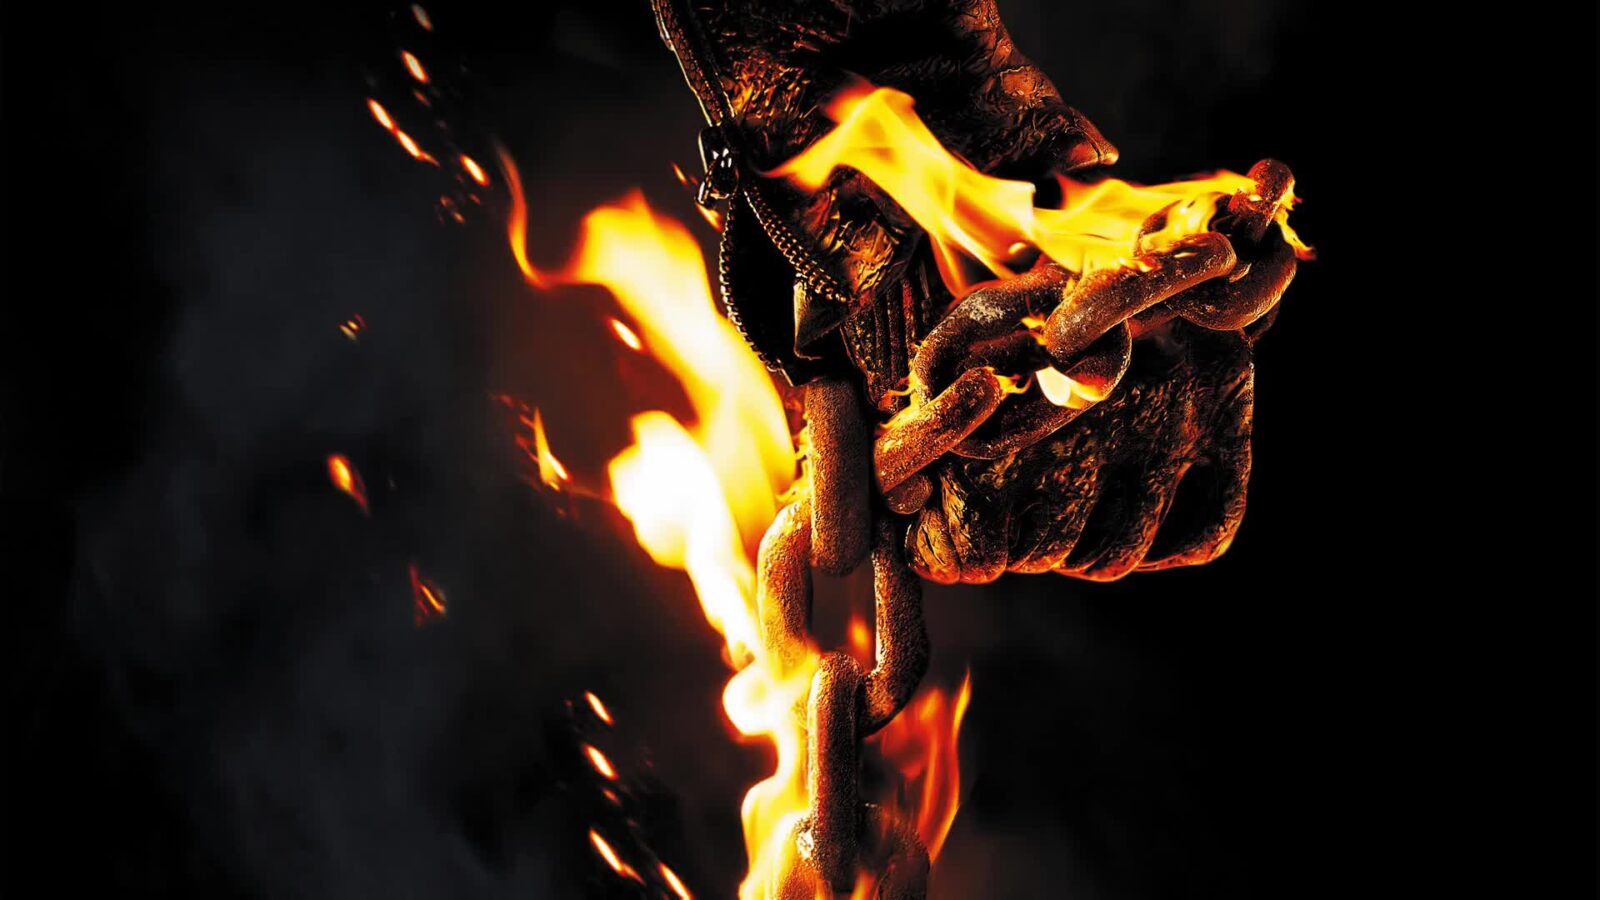 LiveWallpapers4Free.com | Ghost Rider Torture Flame Chain - Free Live Wallpaper